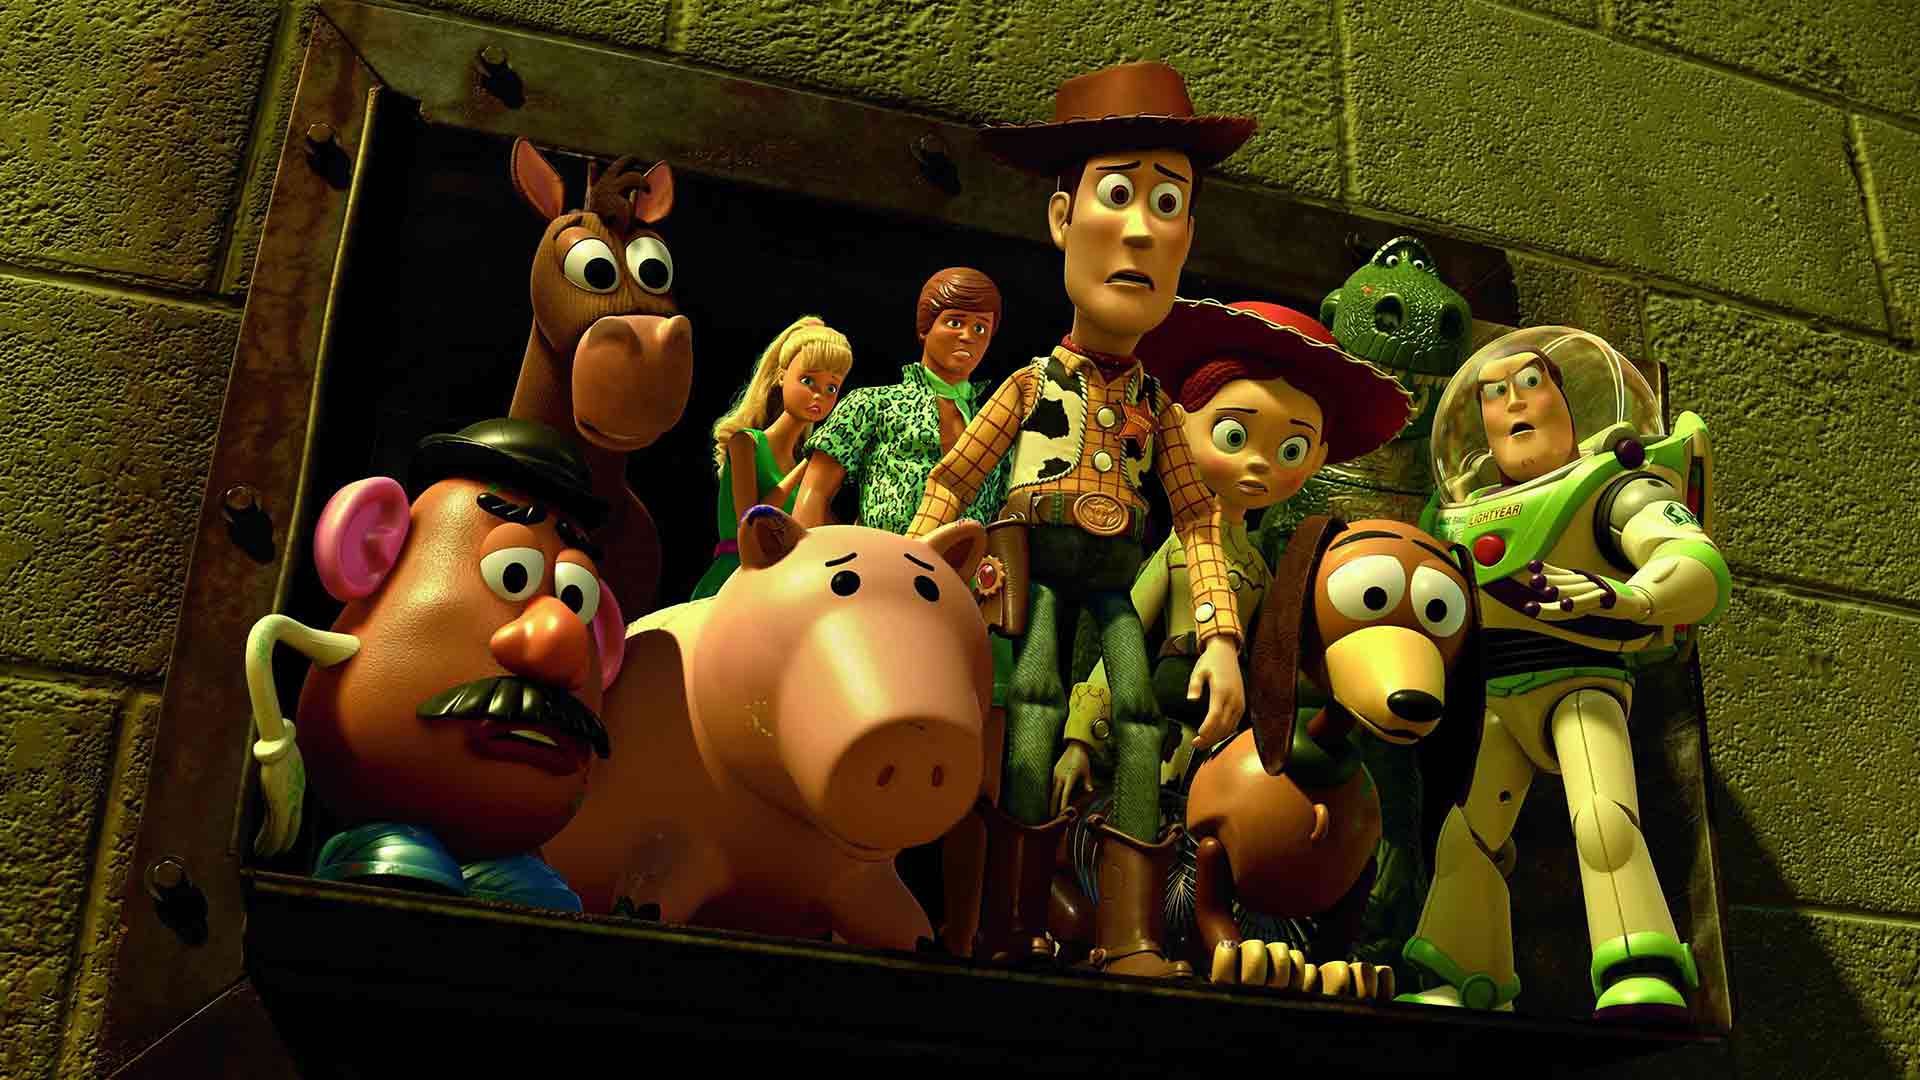 Toys are looking at the animation of the toy story 3